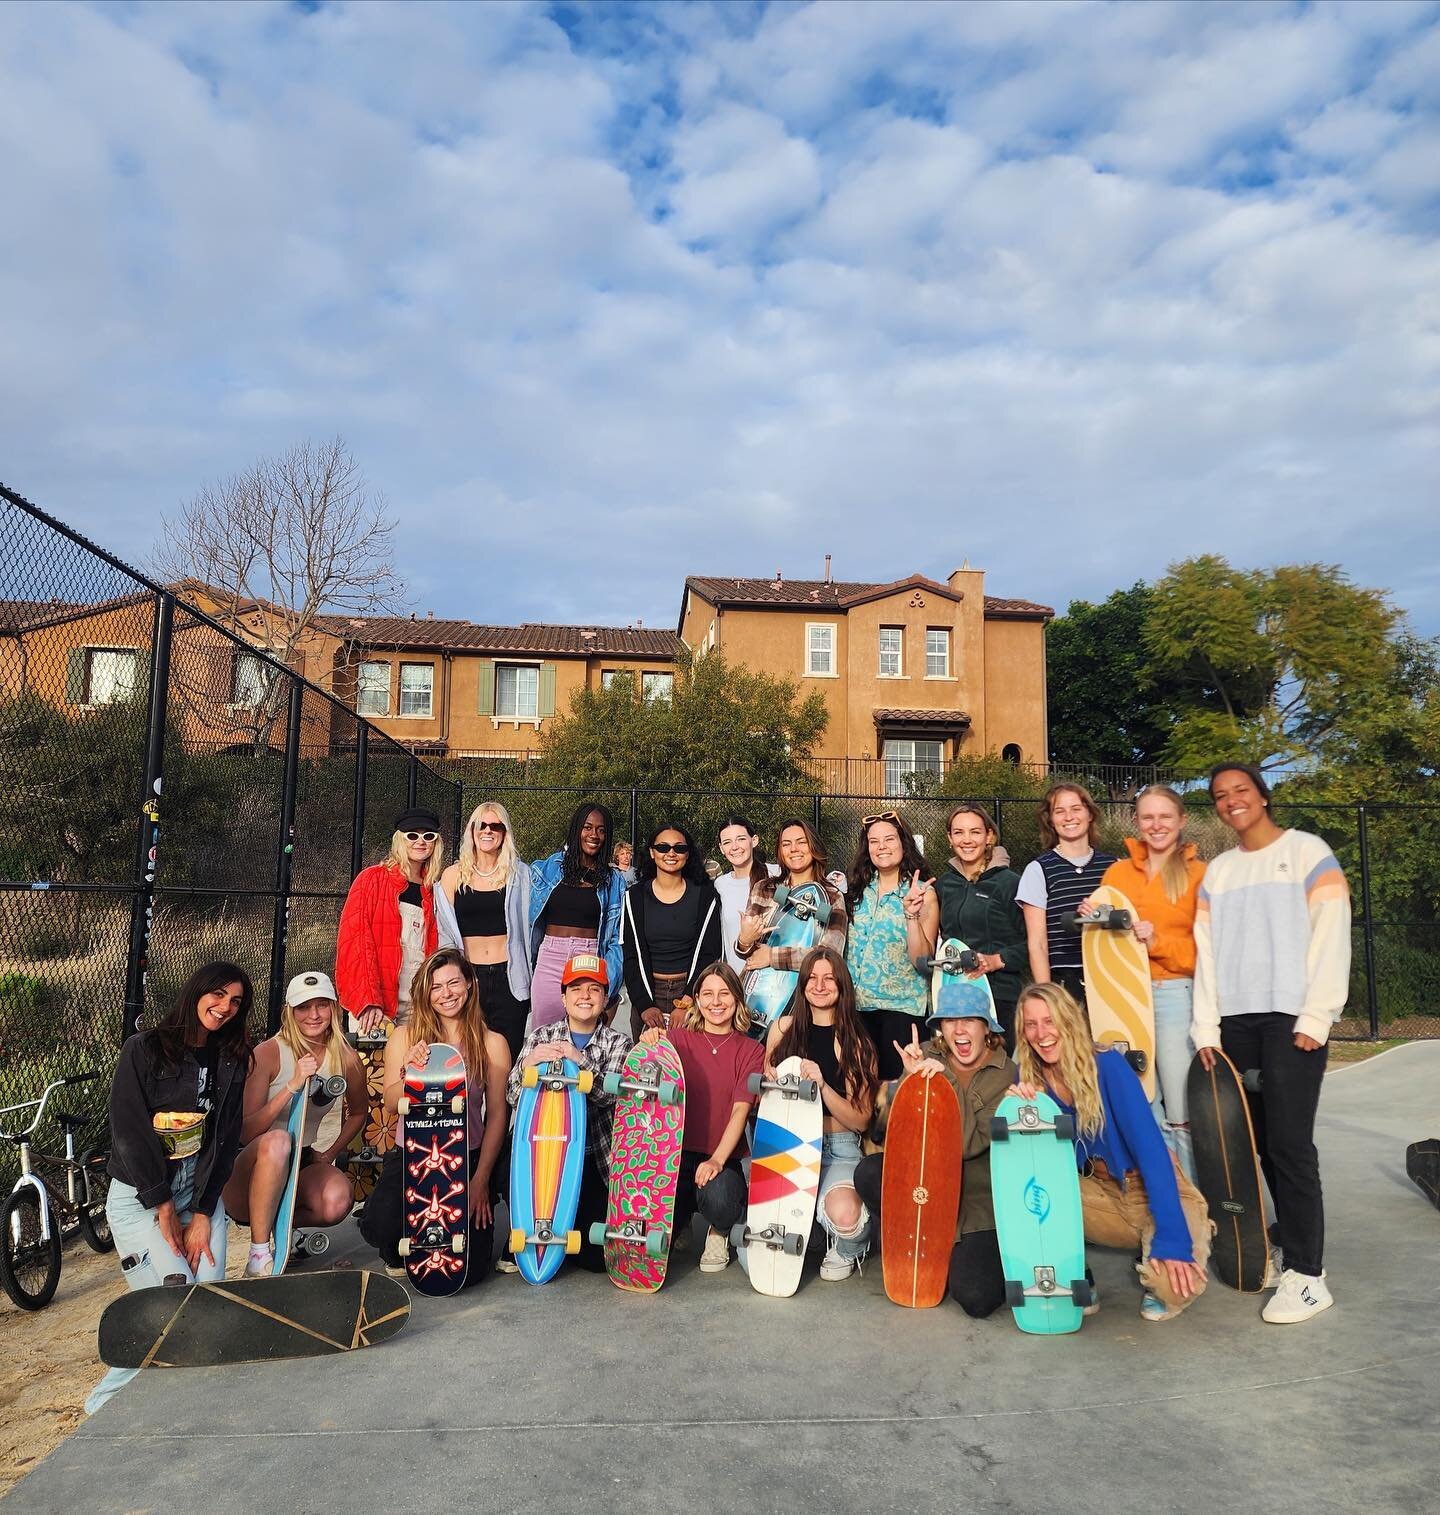 We had so much fun at our pump track meet up on Saturday 🫶🏼.

P.S. Don&rsquo;t forget to RSVP for our self-defense class and skate meet up this weekend. The link is in our bio!